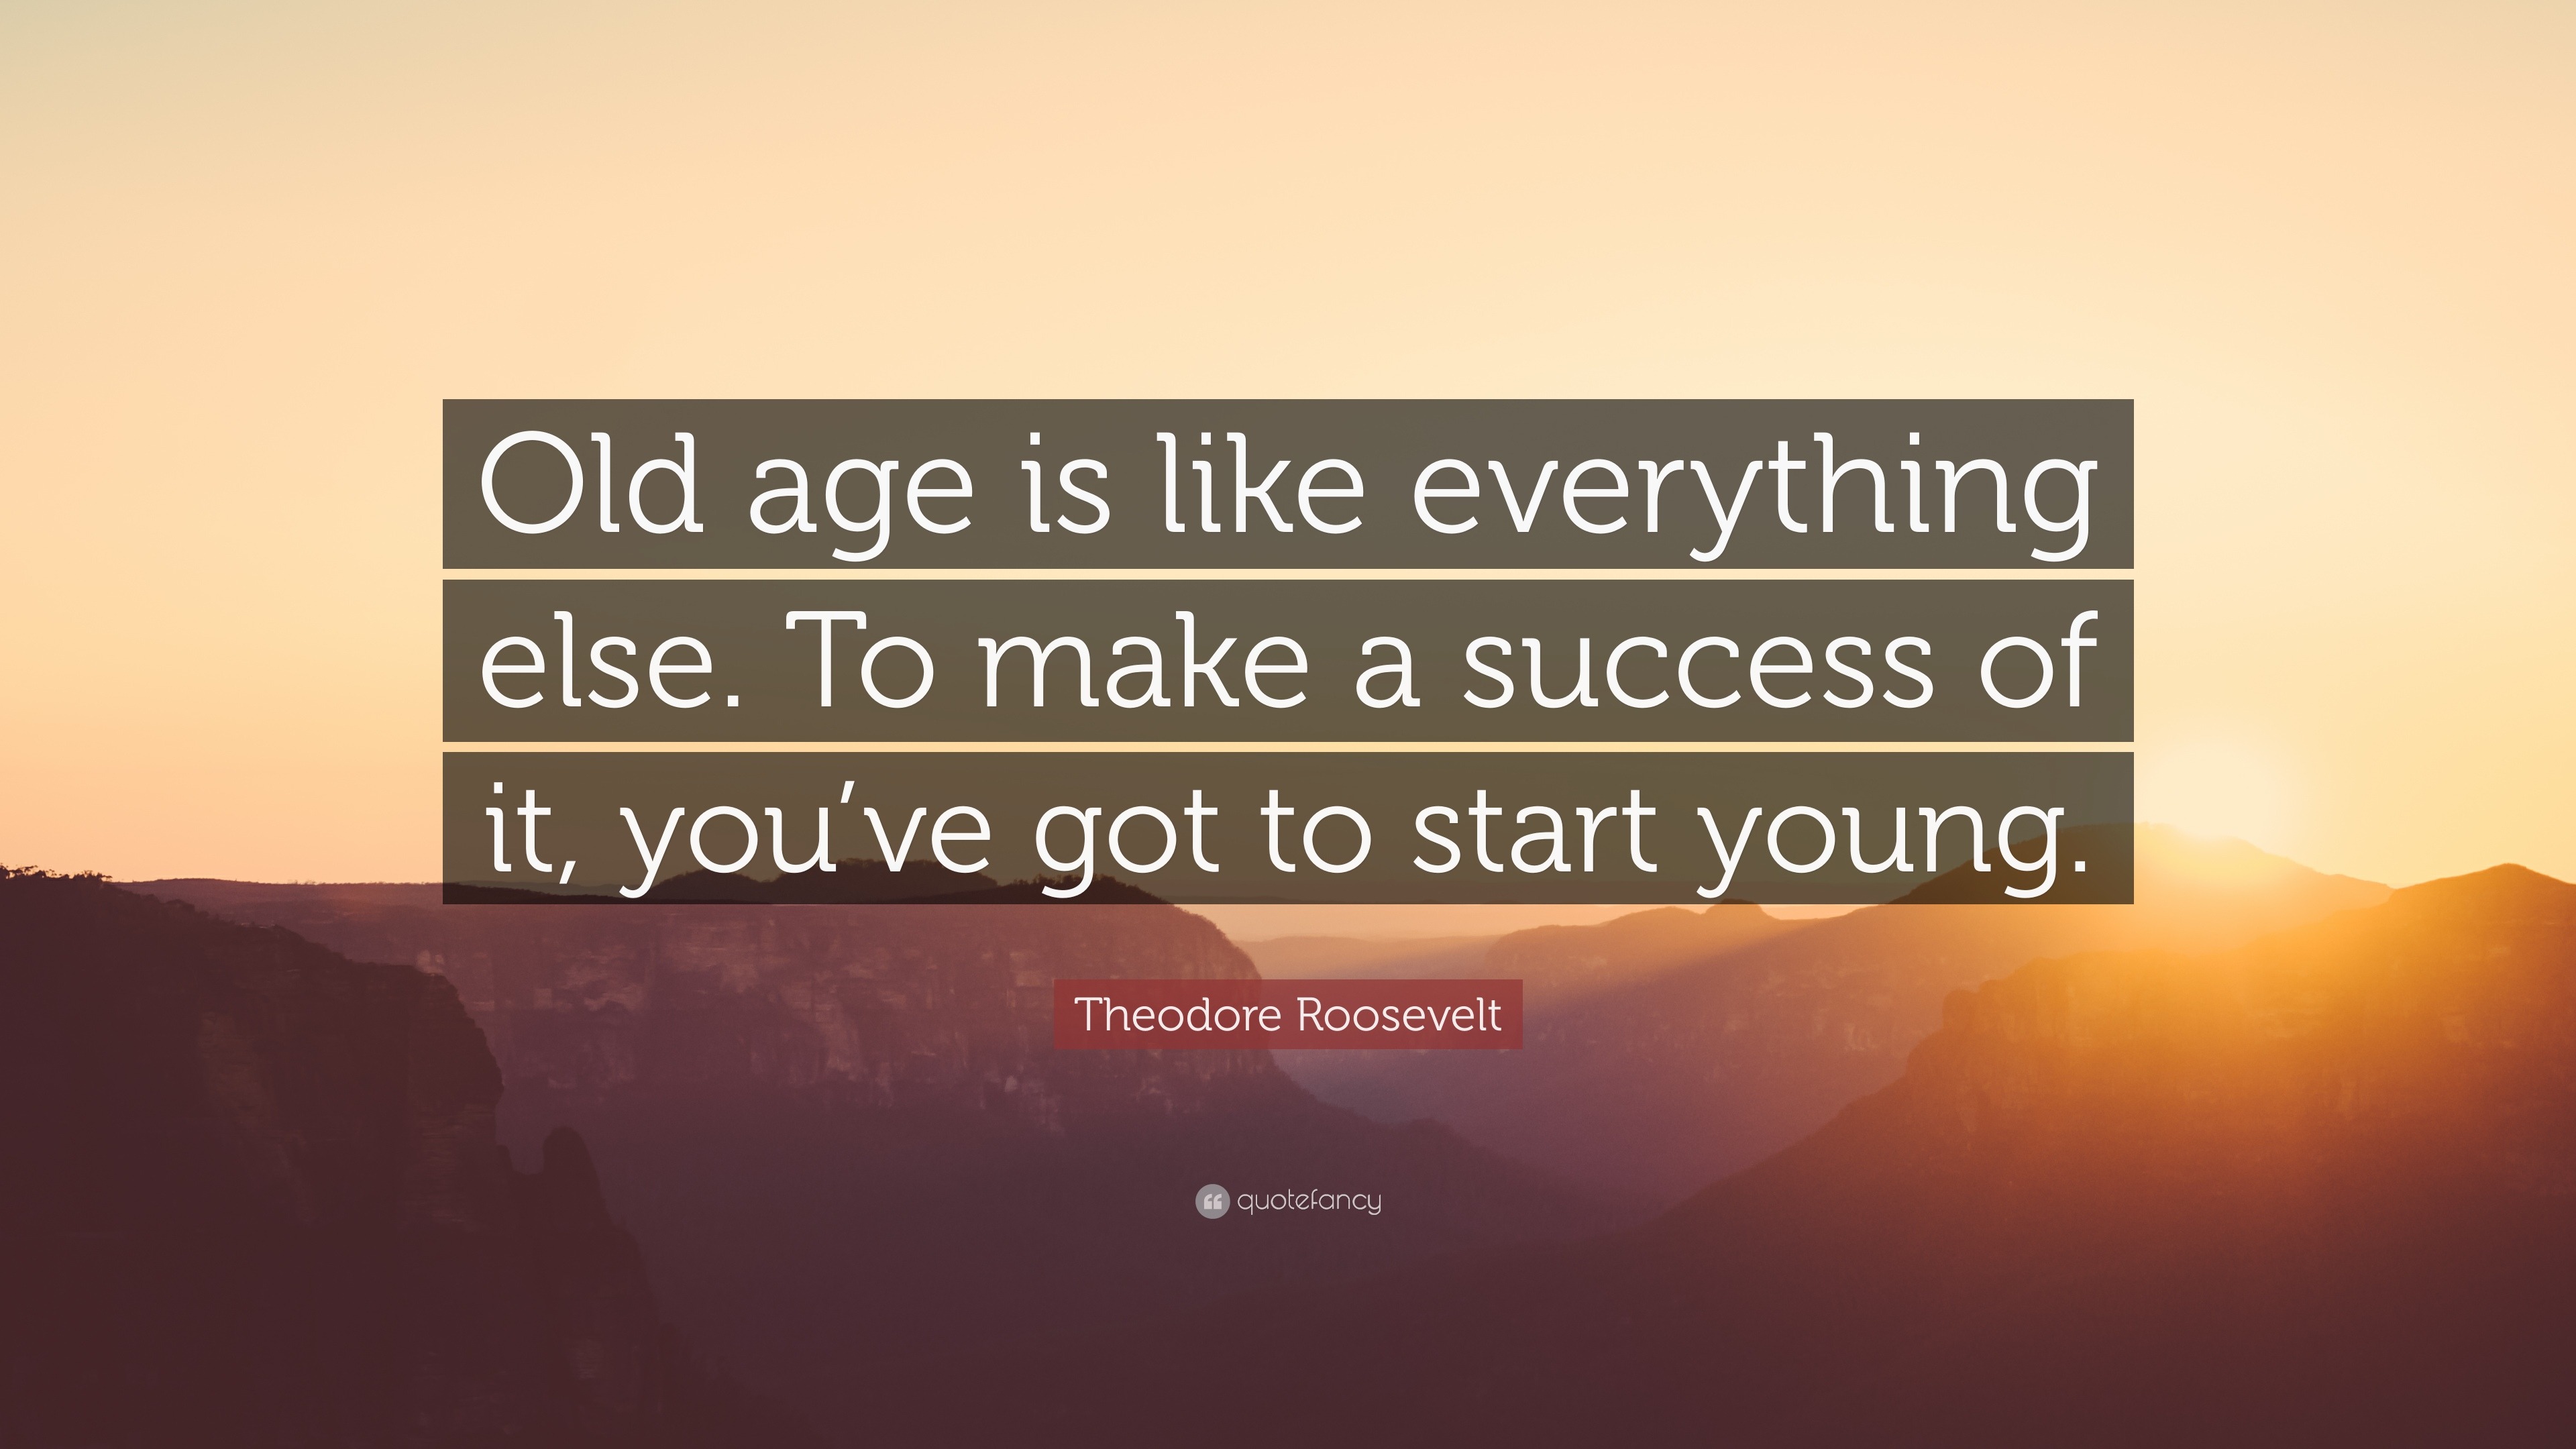 Theodore Roosevelt Quote: “Old age is like everything else. To make a